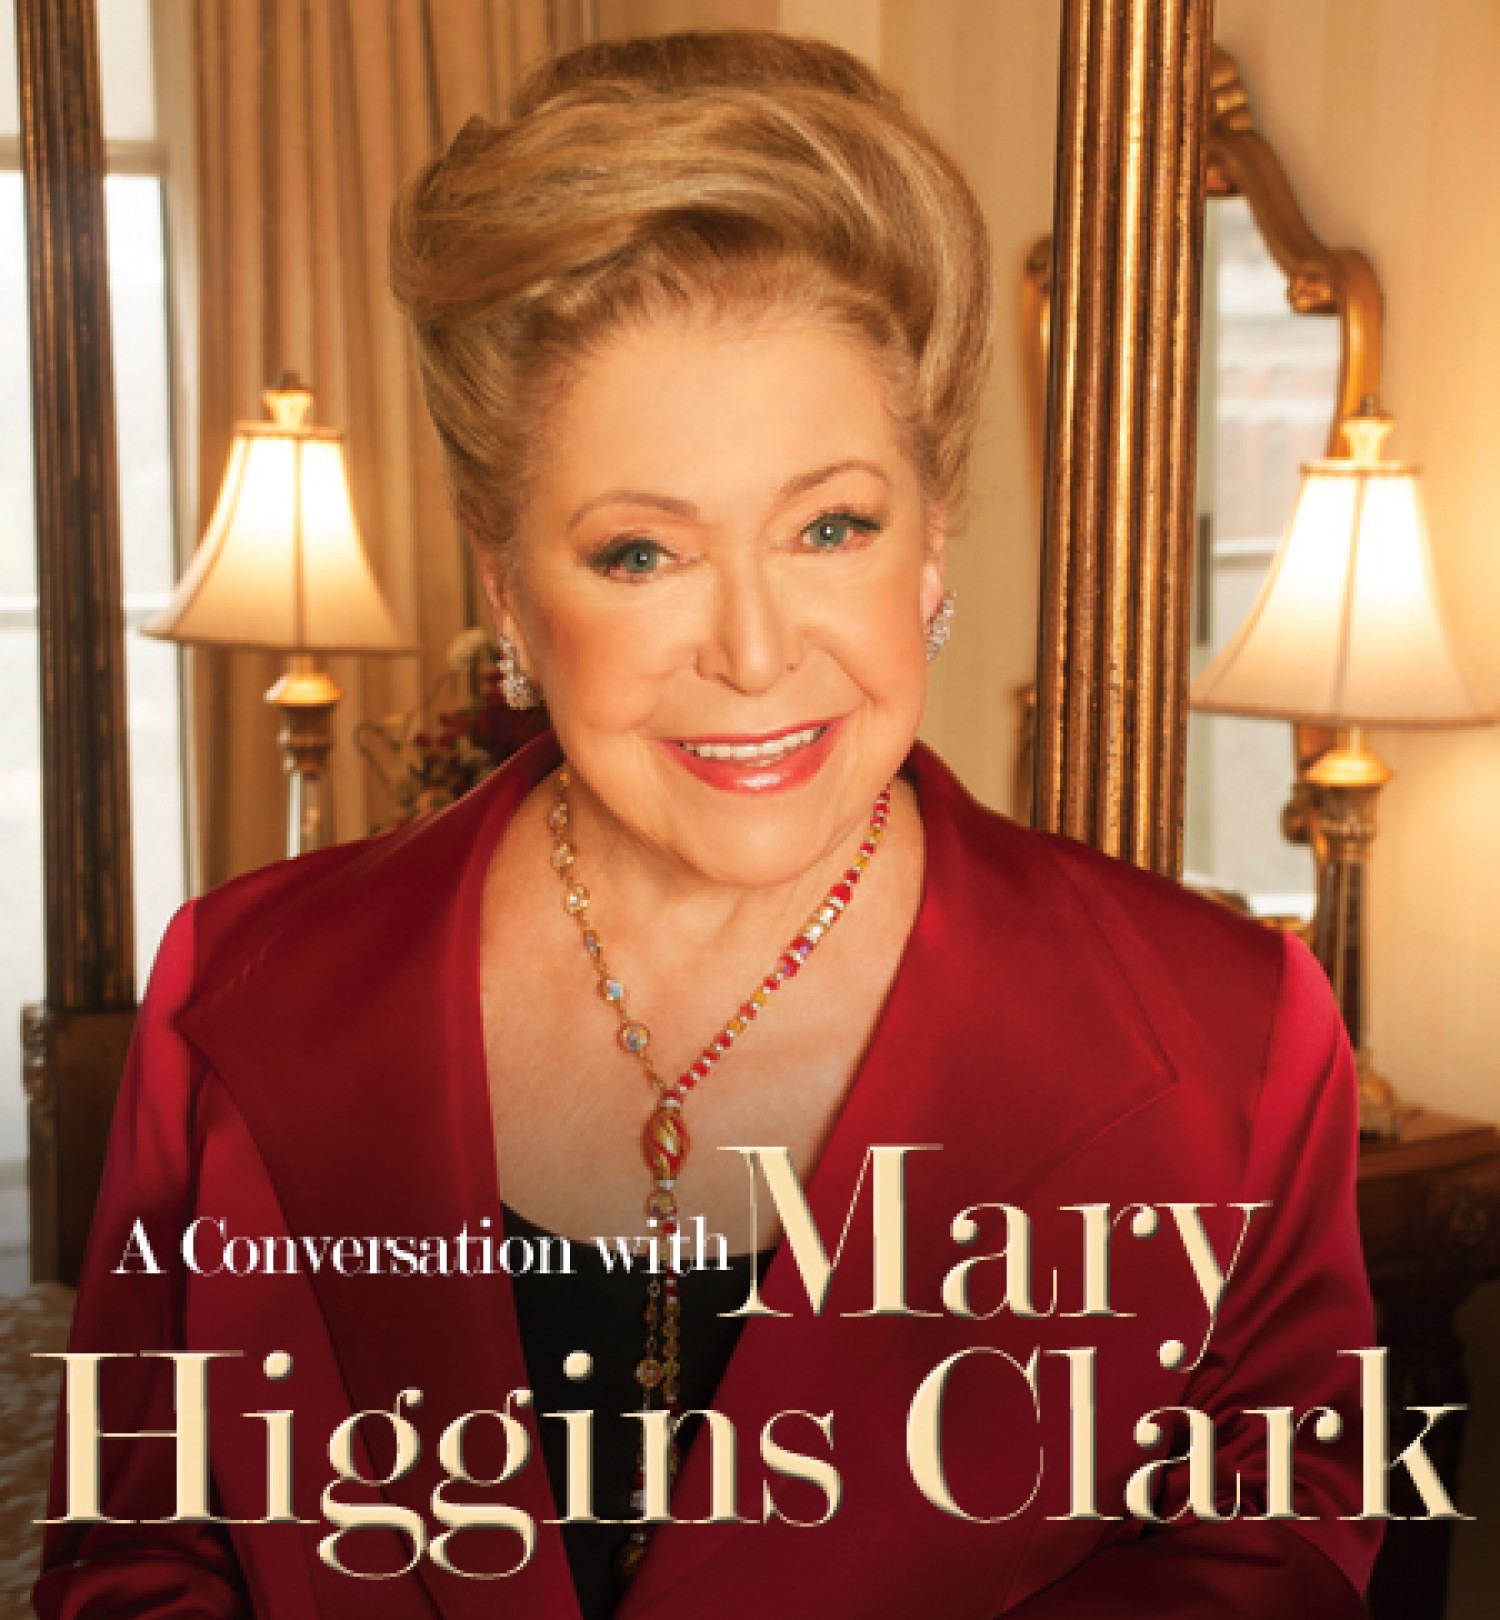 A Conversation with Mary Higgins Clark|Show | The Lyric Theatre